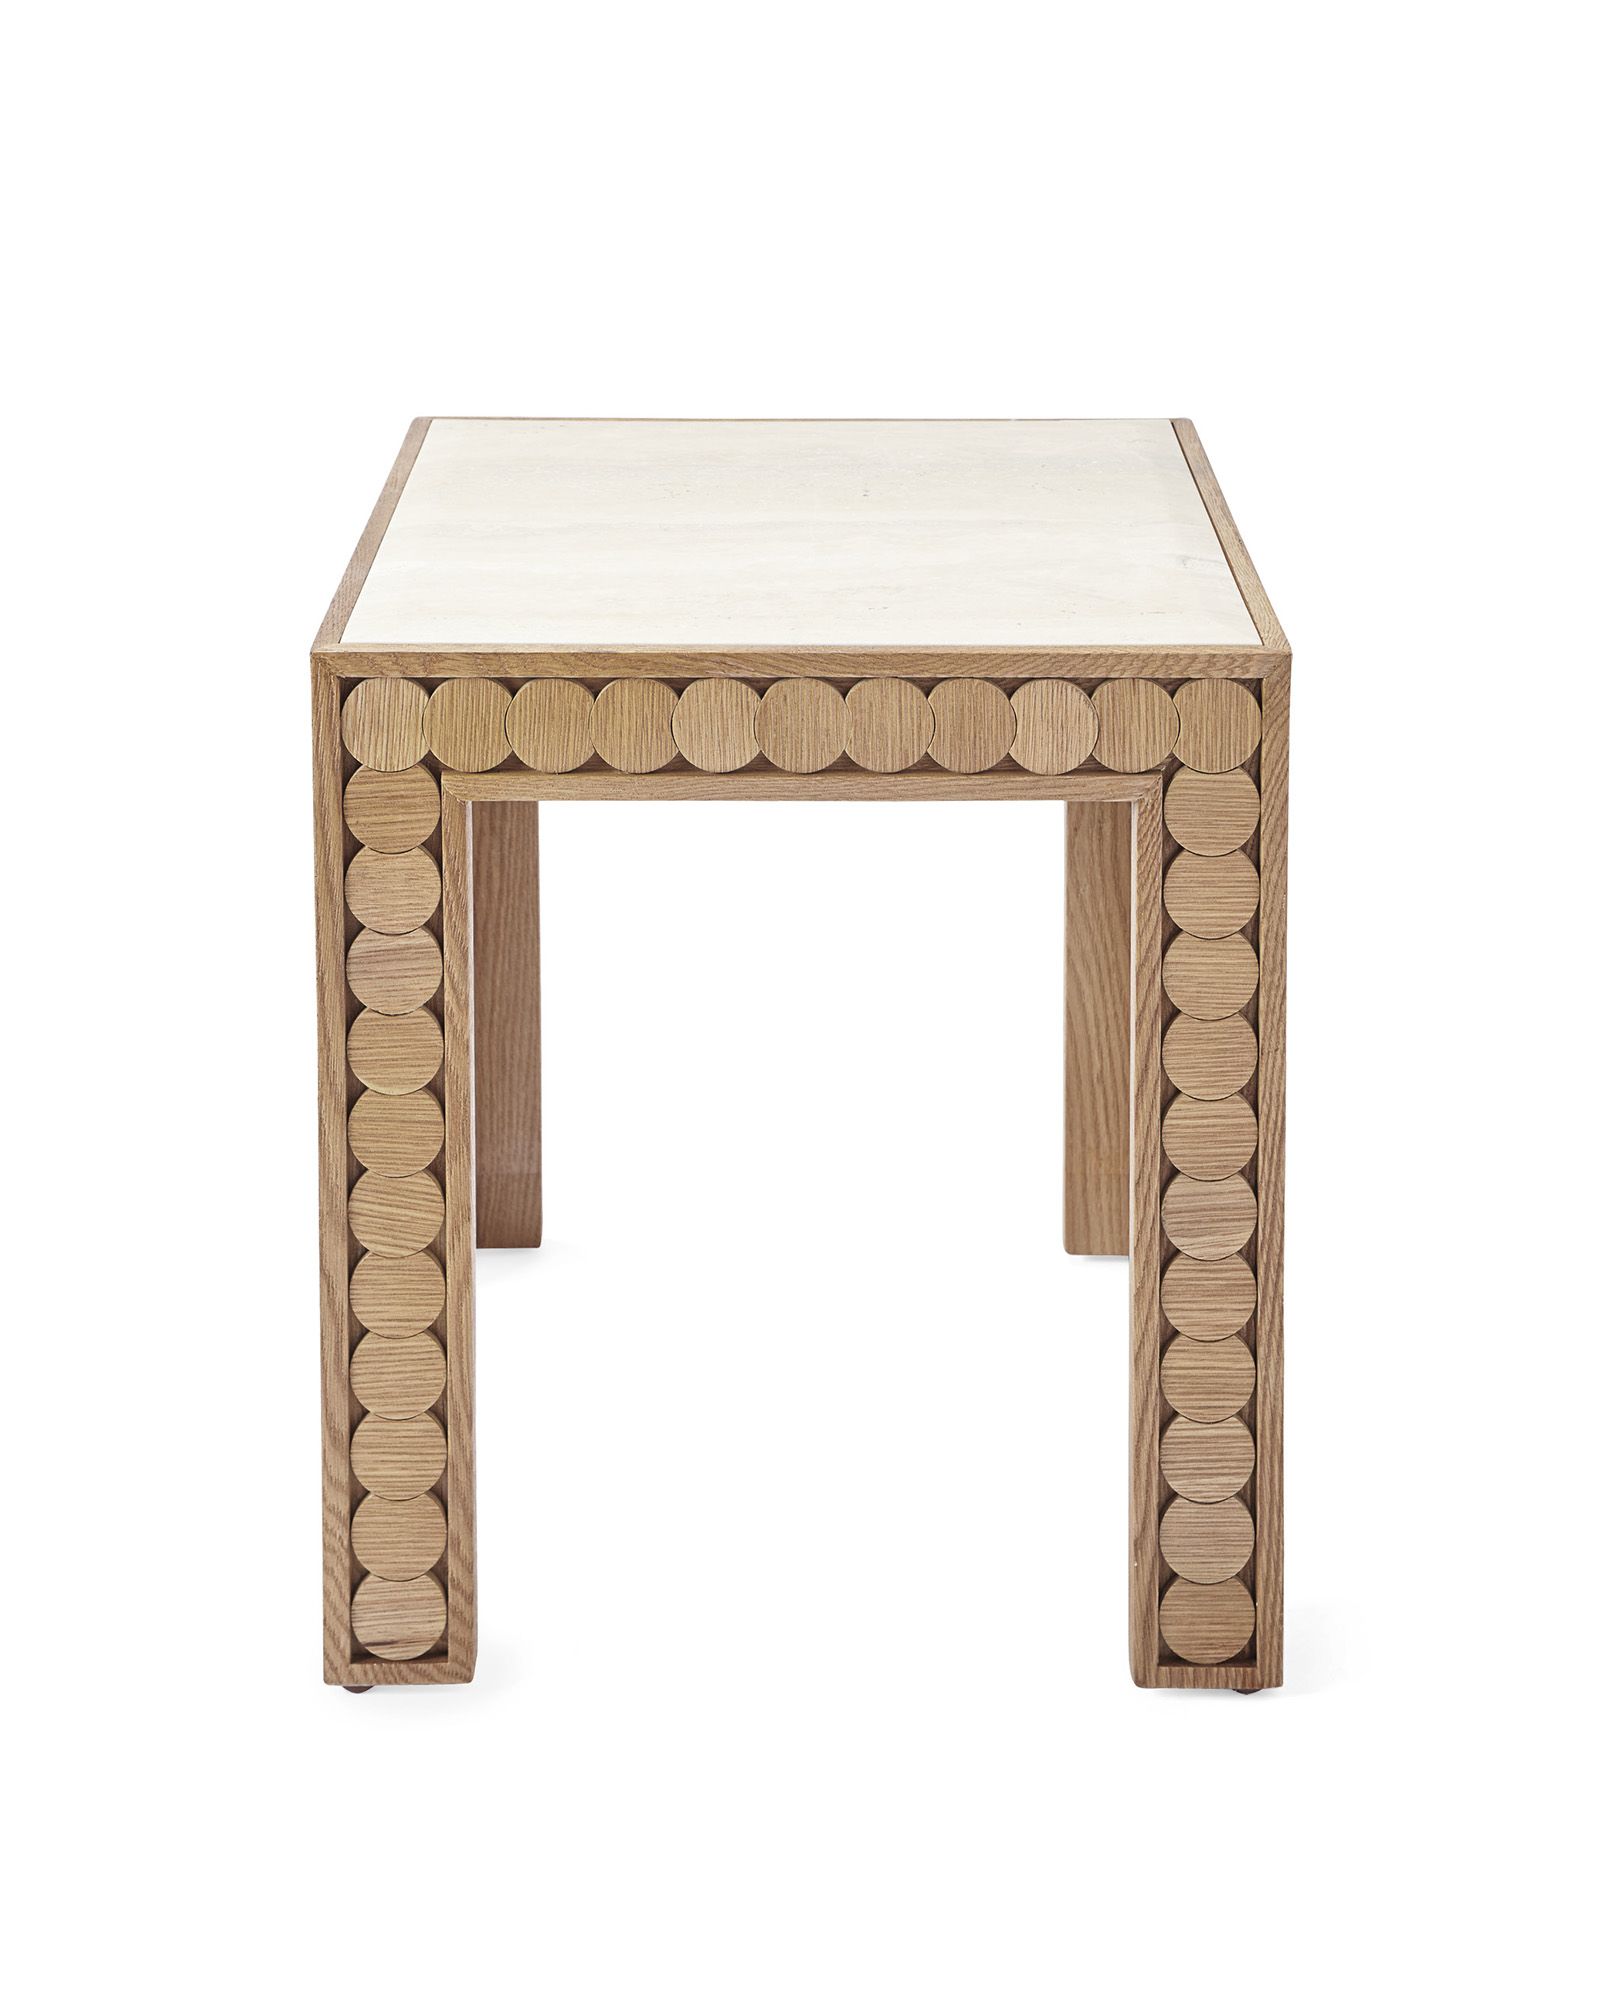 ashbury side table living furniture minsmere cane accent inspired beautiful antique paired handcarved oak base with elegant travertine top hand applied discs attractive detail